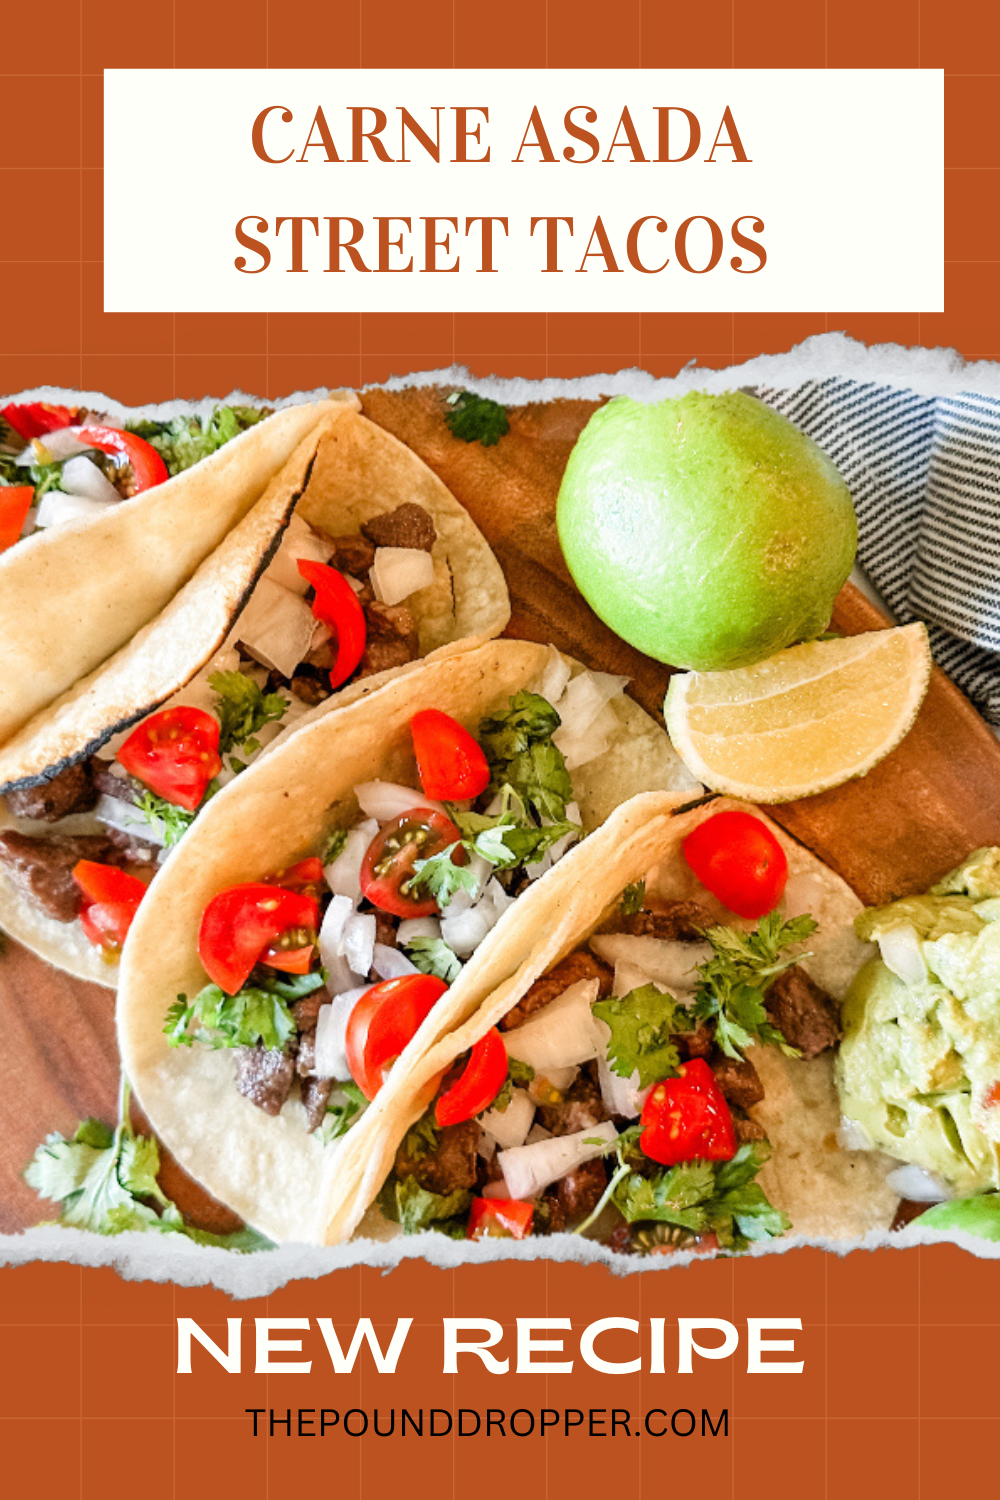 This Carne Asada Street Tacos recipe is super flavorful and requires just a few simple ingredients! Juicy tender grilled flank steak infused with incredible Mexican flavors-making for the best Carne Asada Street Tacos you’ve ever had! via @pounddropper